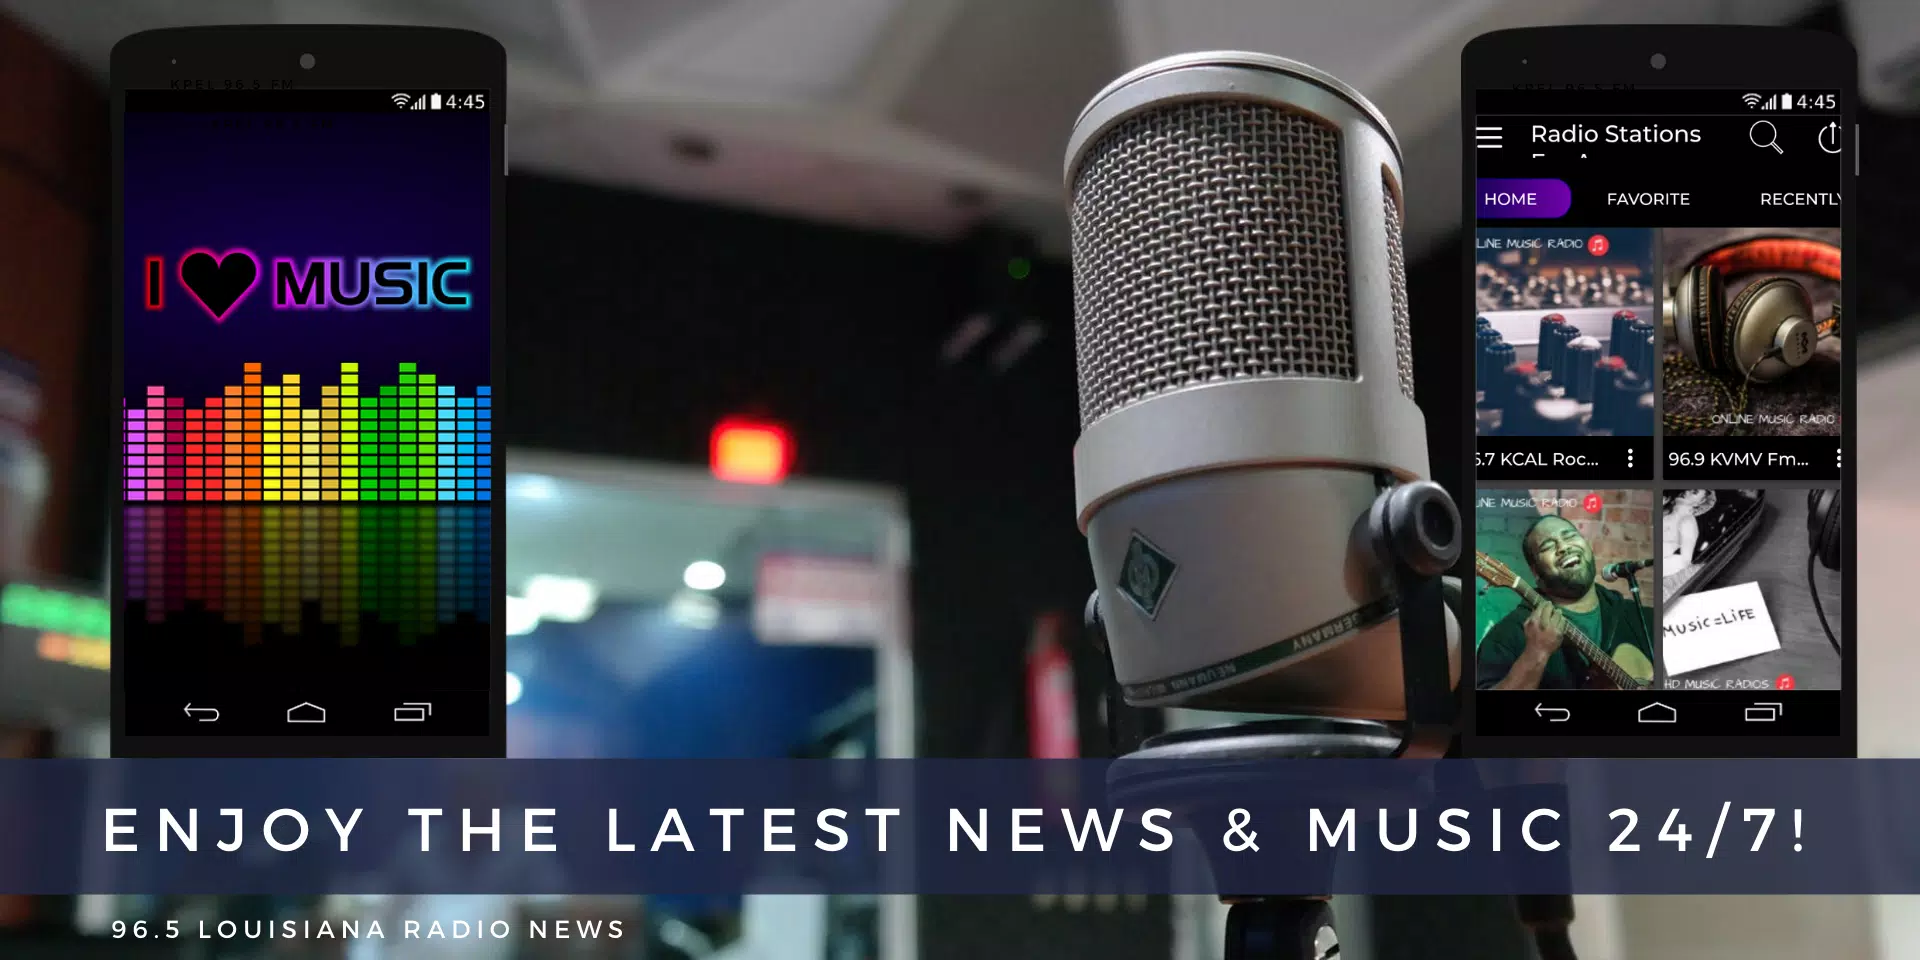 96.5 Fm Louisiana News Radio Stations Online Free for Android - APK Download